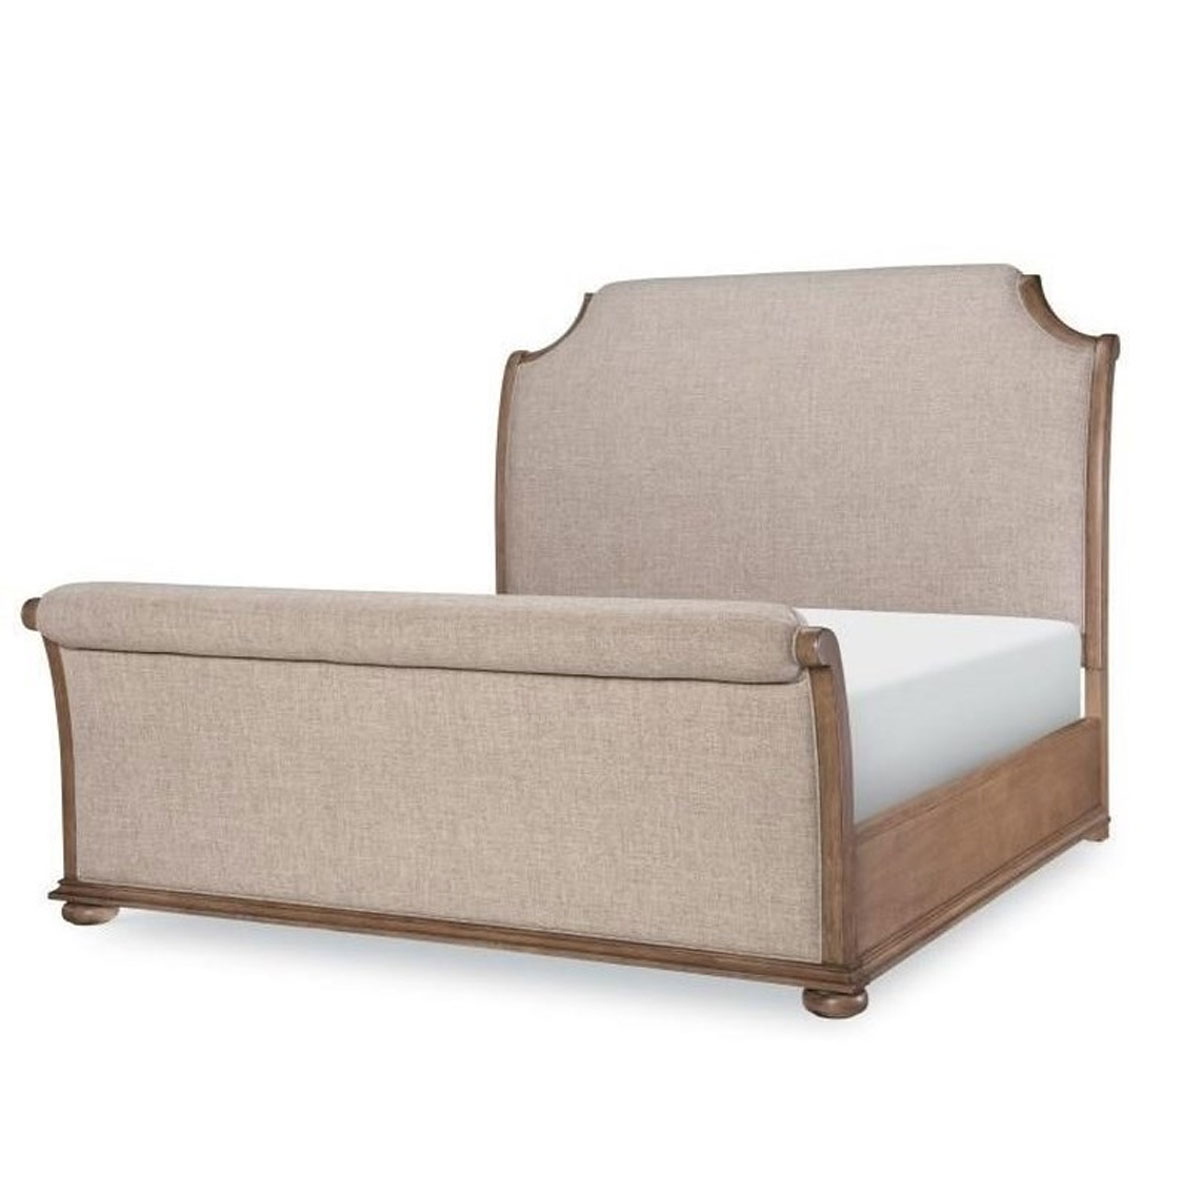 Picture of CAMDEN HEIGHTS UPHOLSTERED BED